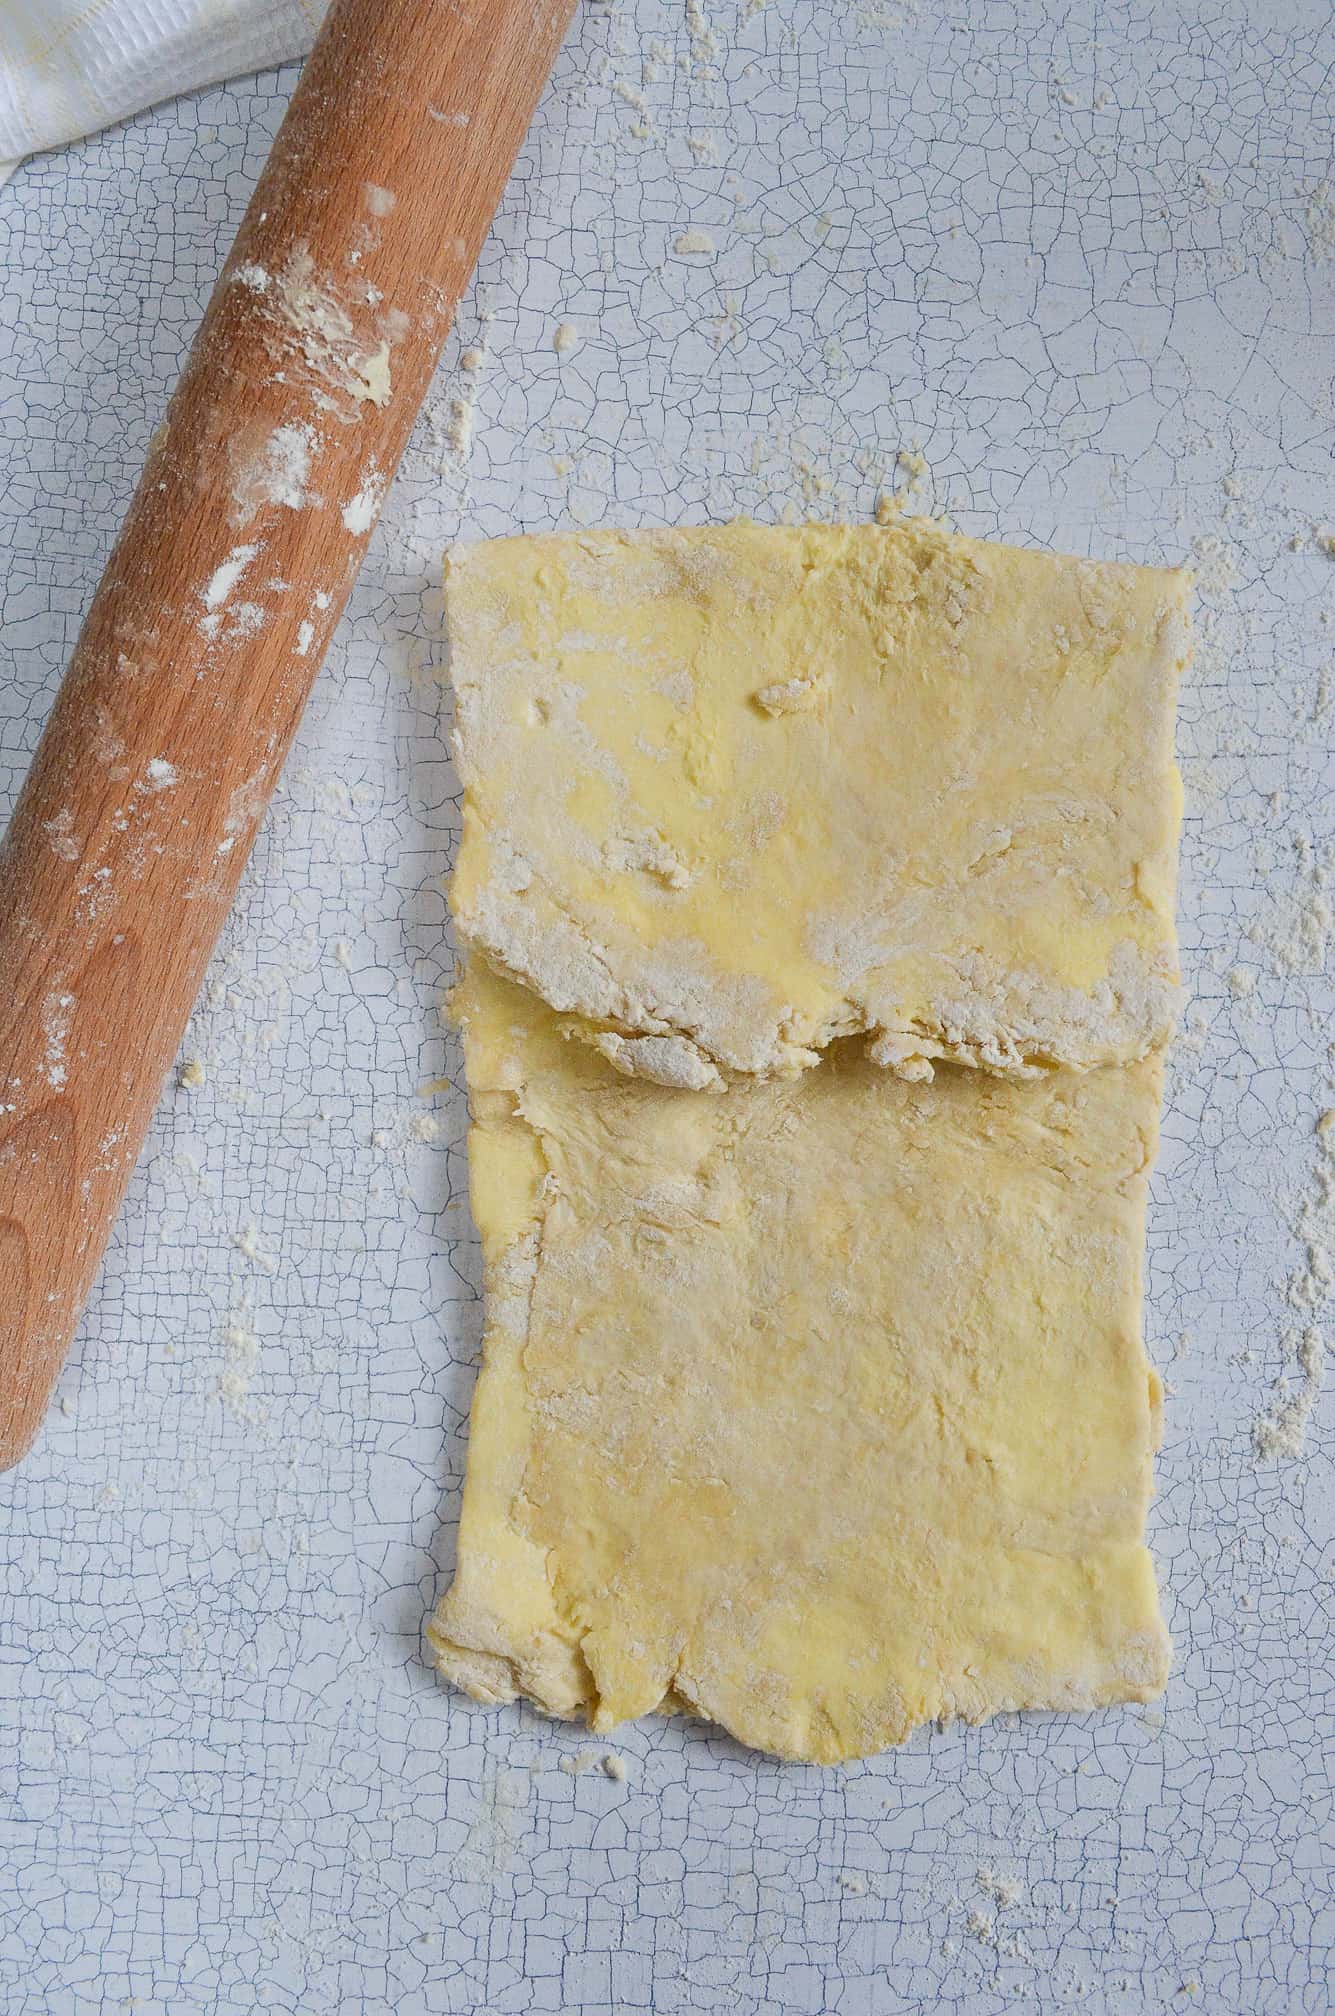 rough-puff pastry process